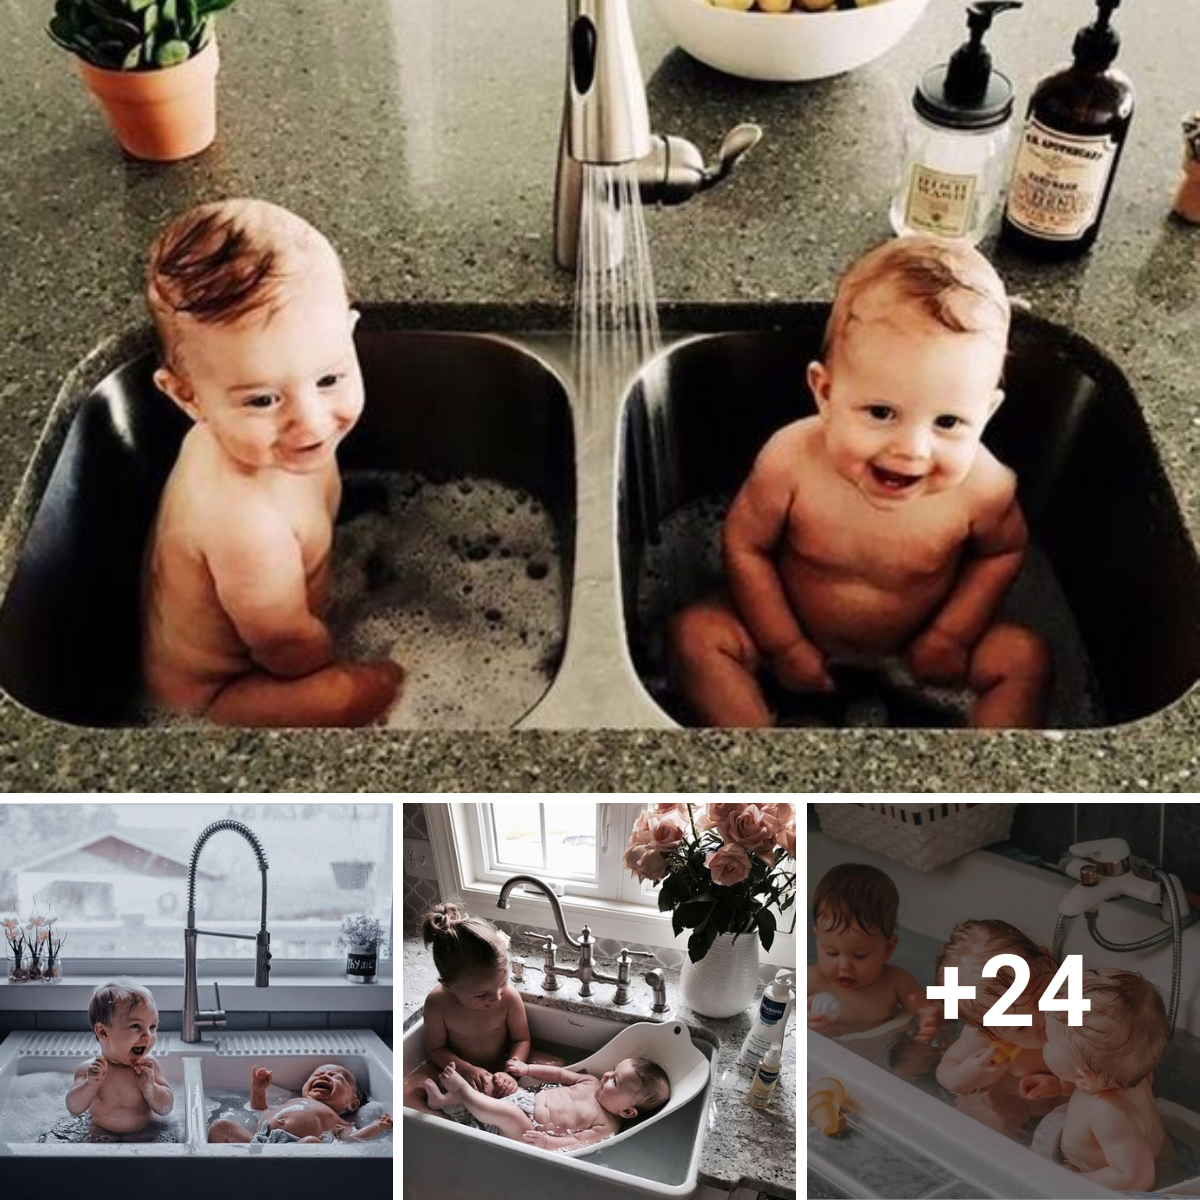 Taking Adorable and Priceless Pictures of Infants Having Fun in the Tub